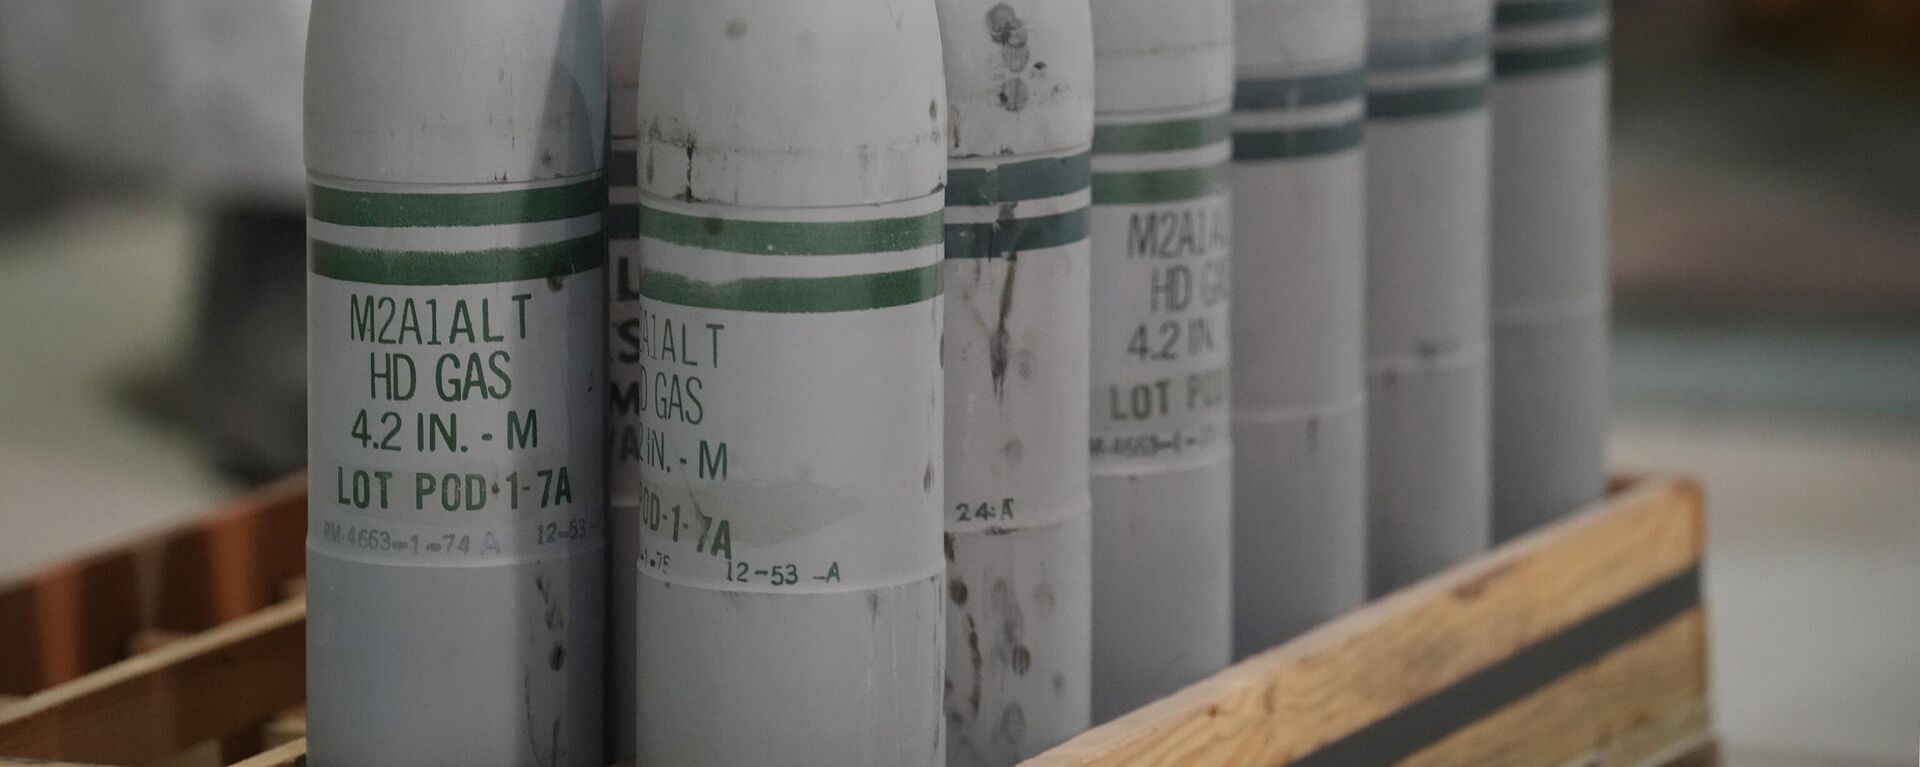 Canisters of mustard gas, which are part of the United States' chemical weapons stockpile, wait for destruction at the U.S. Army Pueblo Chemical Depot Thursday, June 8, 2023, in Pueblo, Colo.  - Sputnik Africa, 1920, 27.12.2023